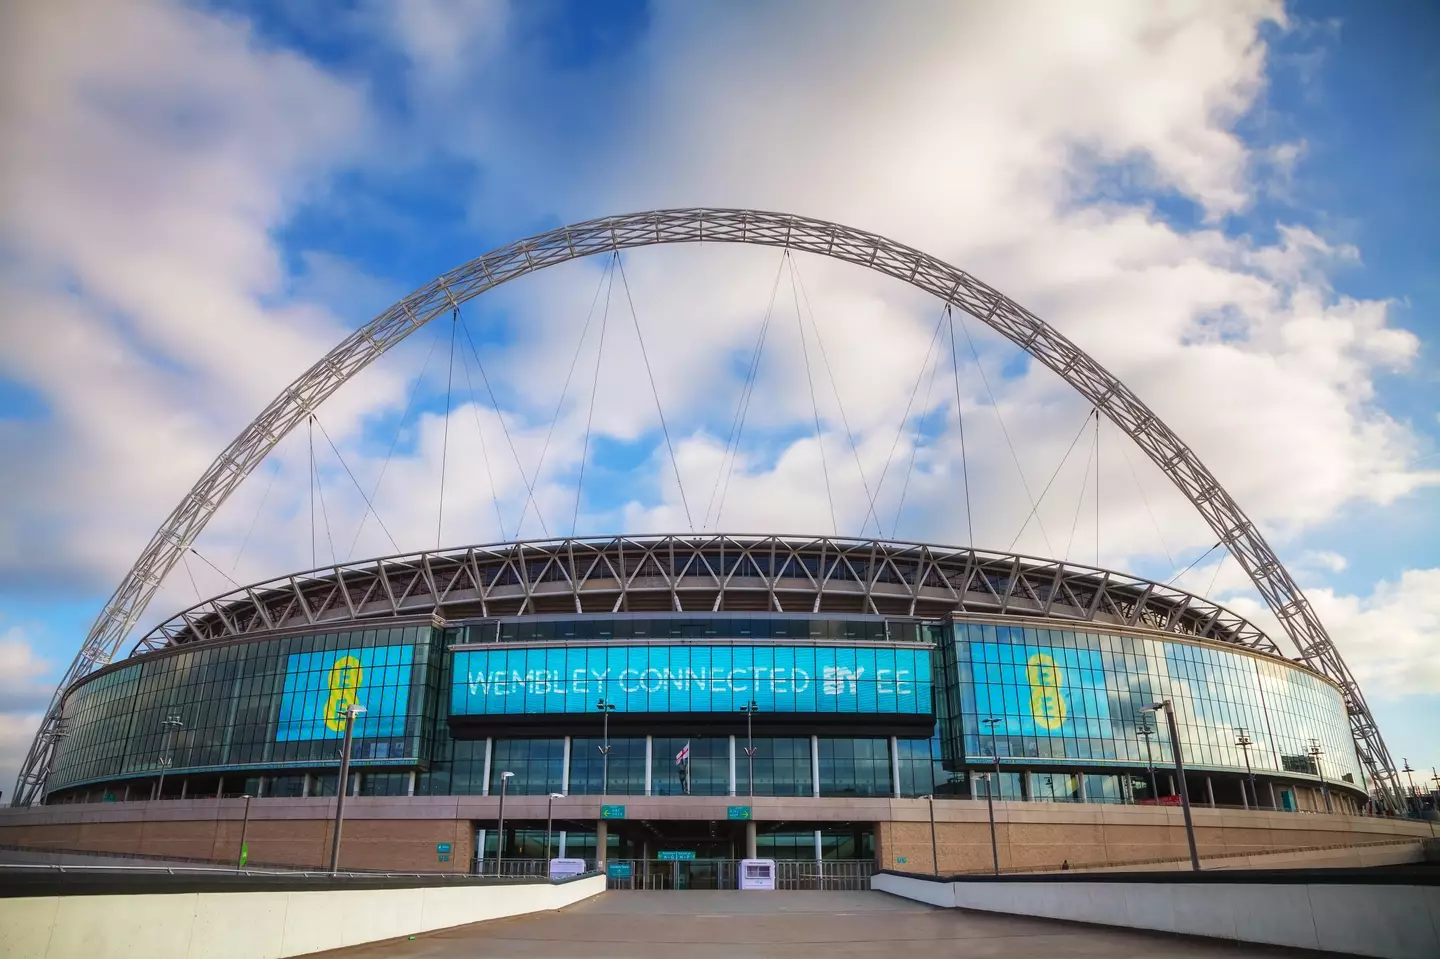 Wembley last hosted the Champions League final in 2013 (Image: PA)